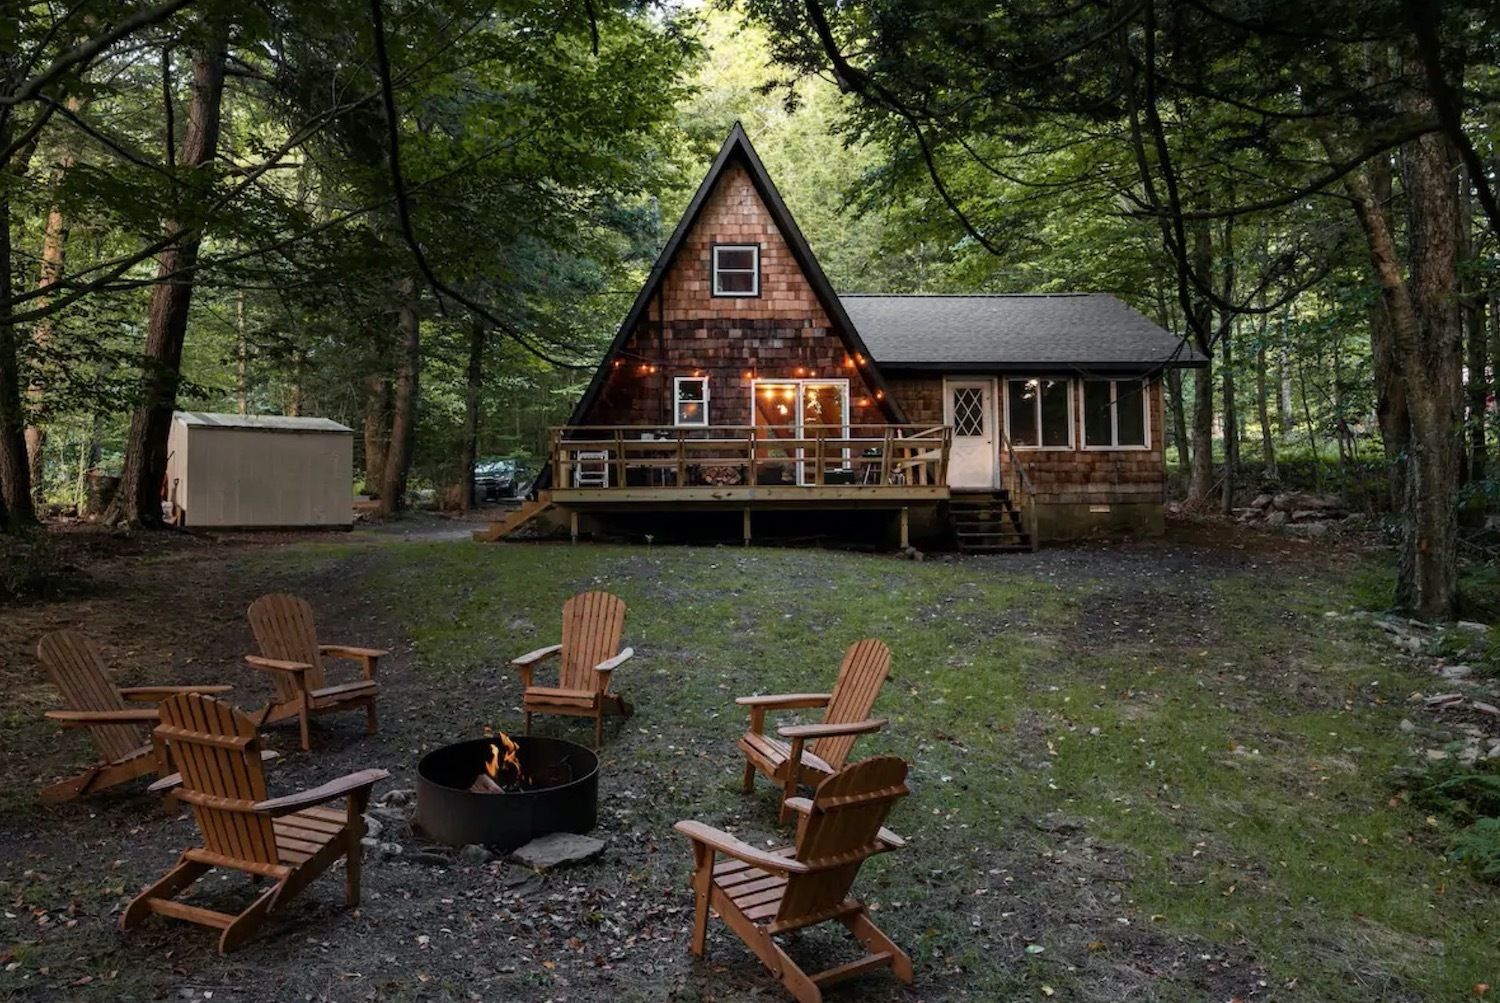 The Little A Airbnb cabin rental in Pennsylvania